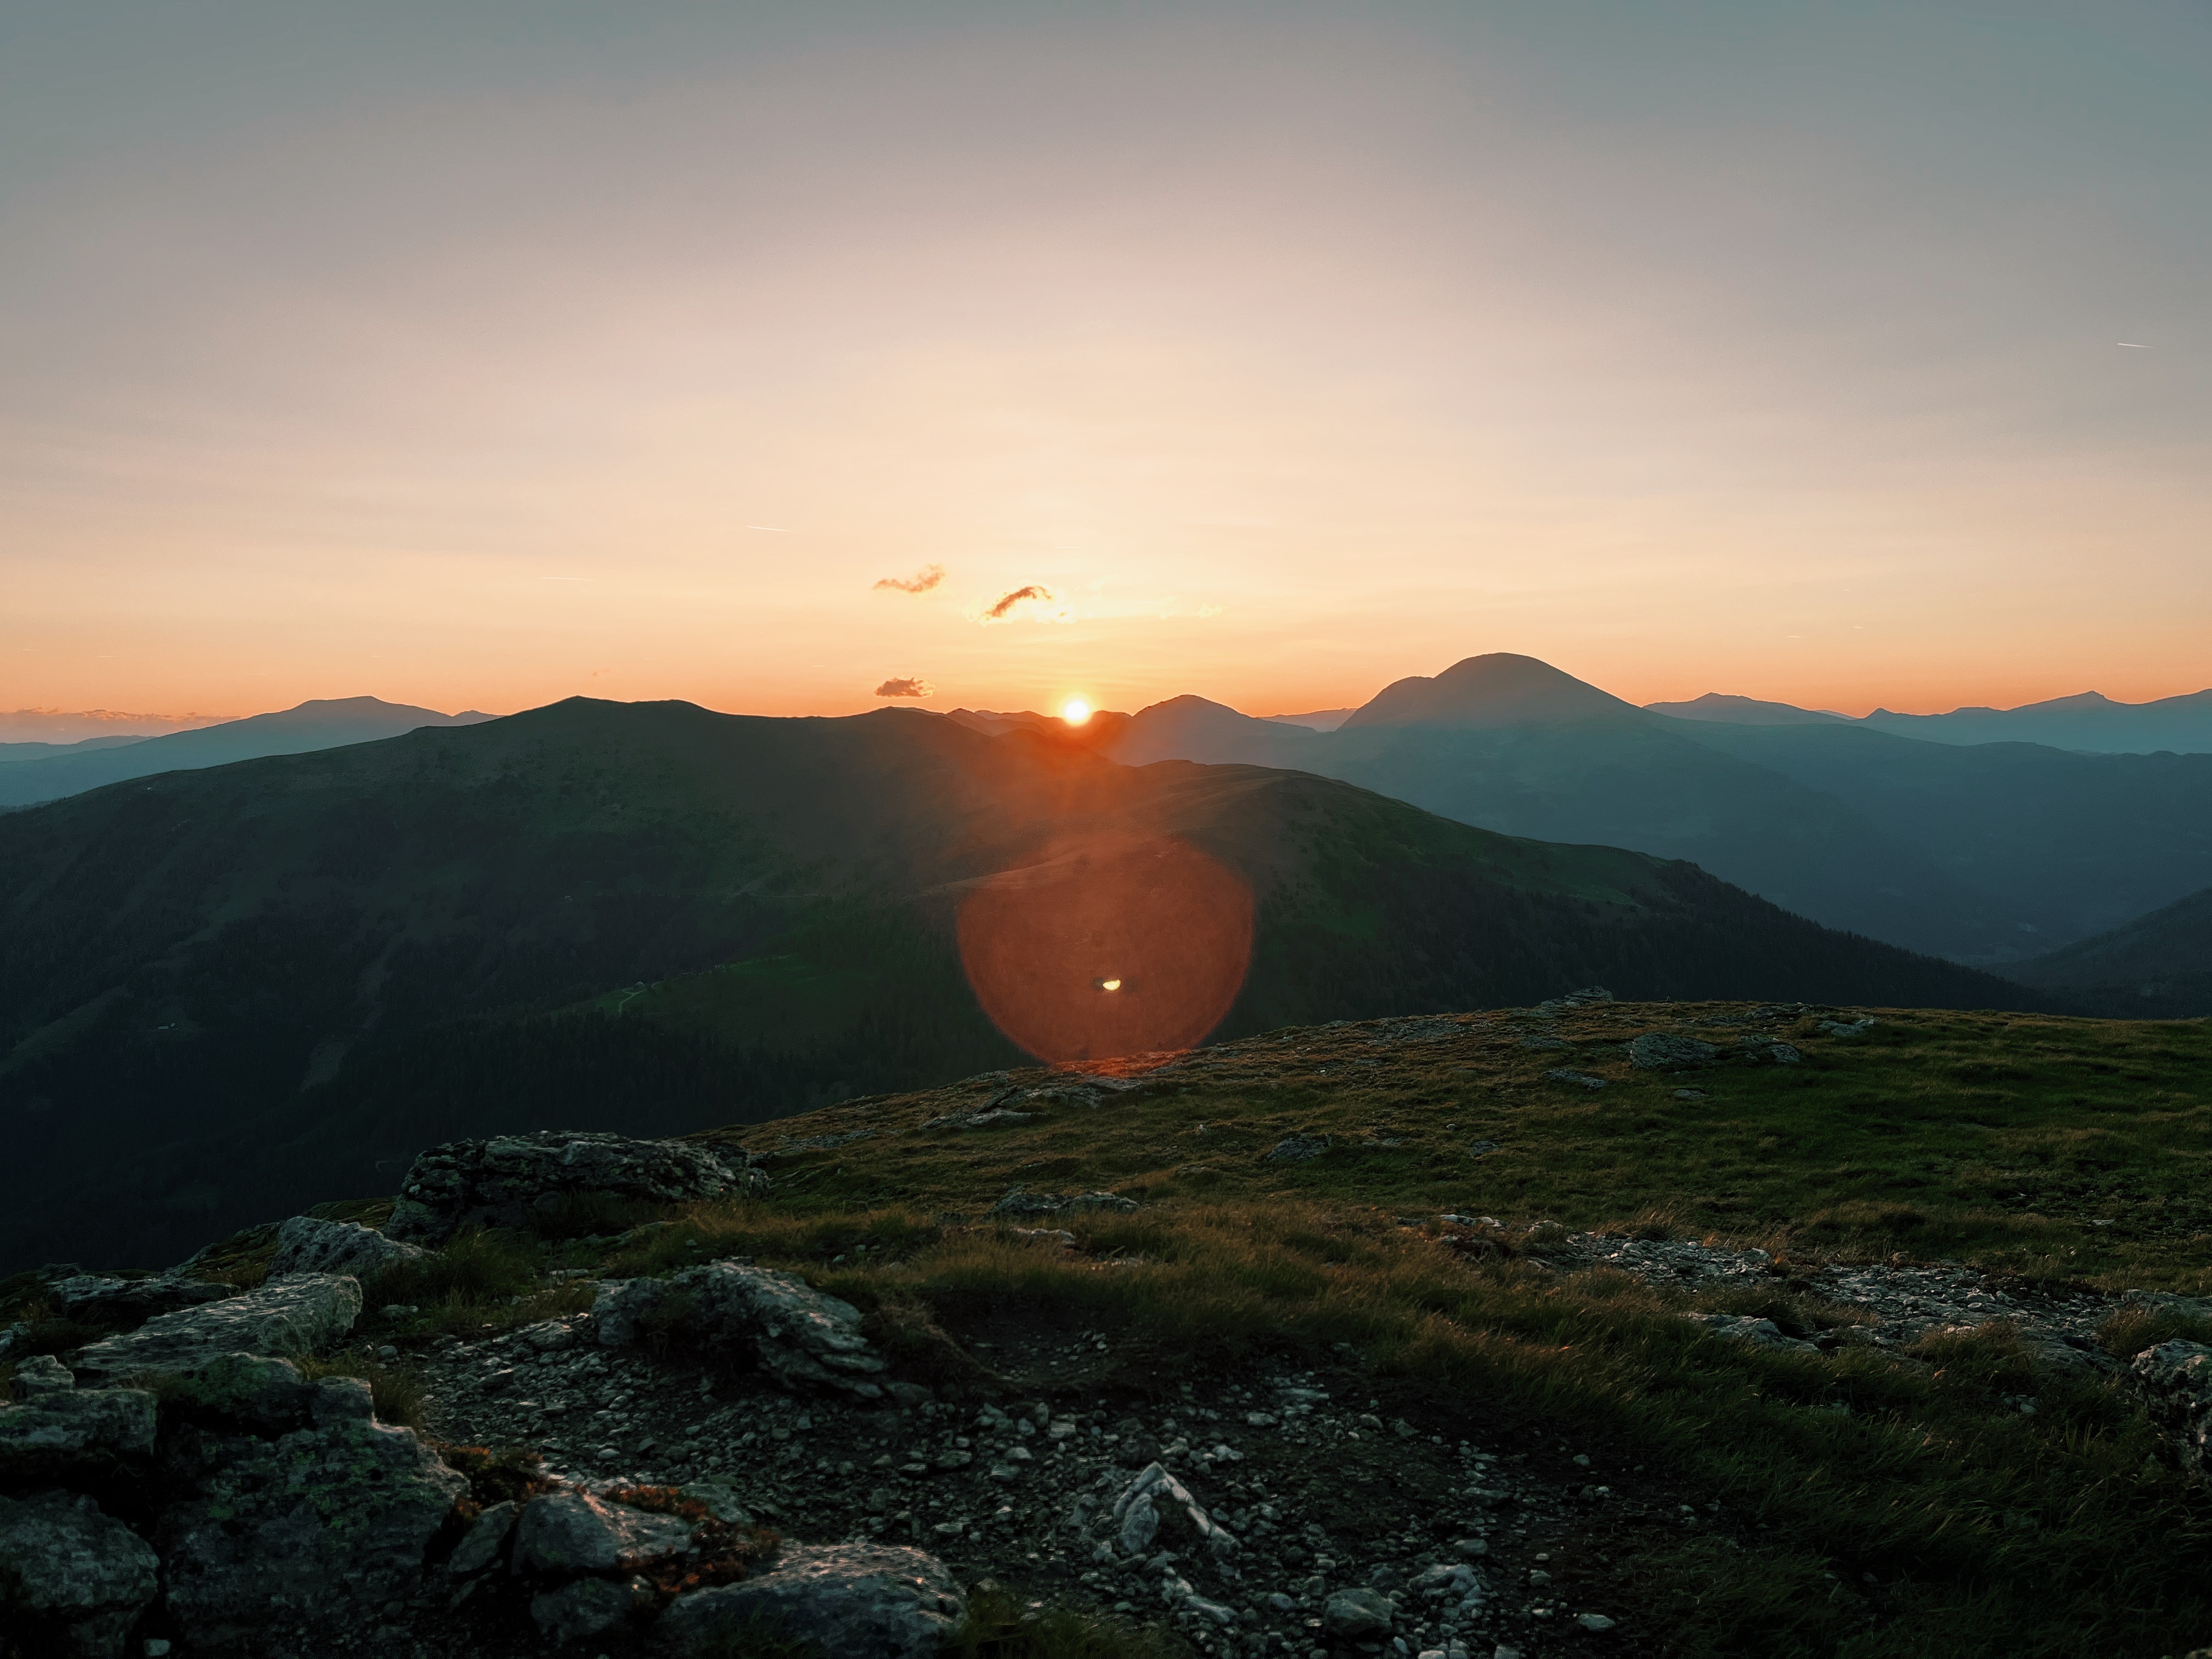 Sunrise over mountain scenary on the Alpe Adria Trail, a long-distance hiking trail in Europe